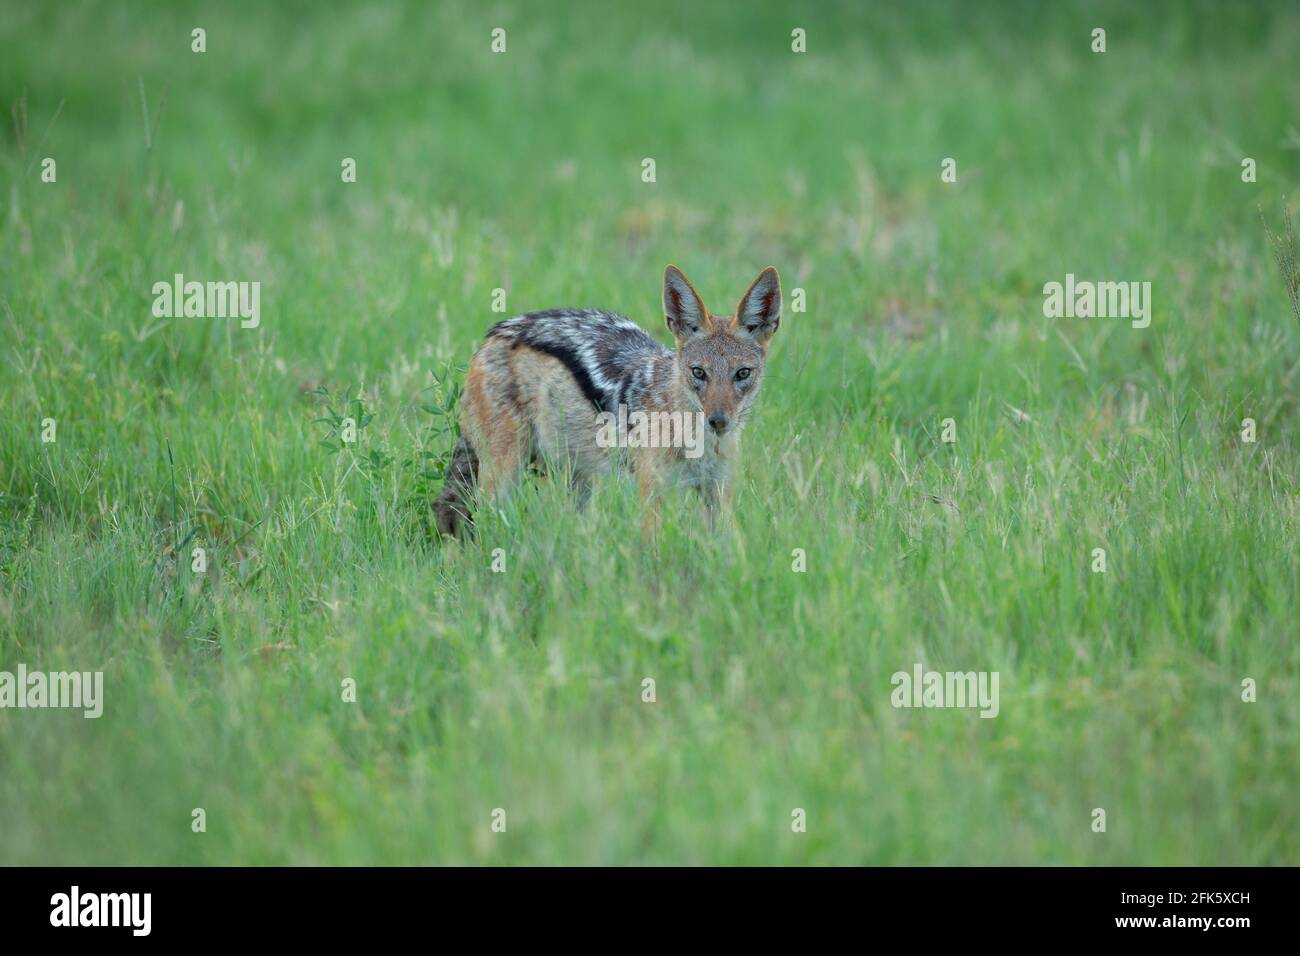 Black-backed Jackal (Canis mesomelas). Standing amongst tall grasses waiting for small animals to unintentionally give themselves away as prey items. Stock Photo